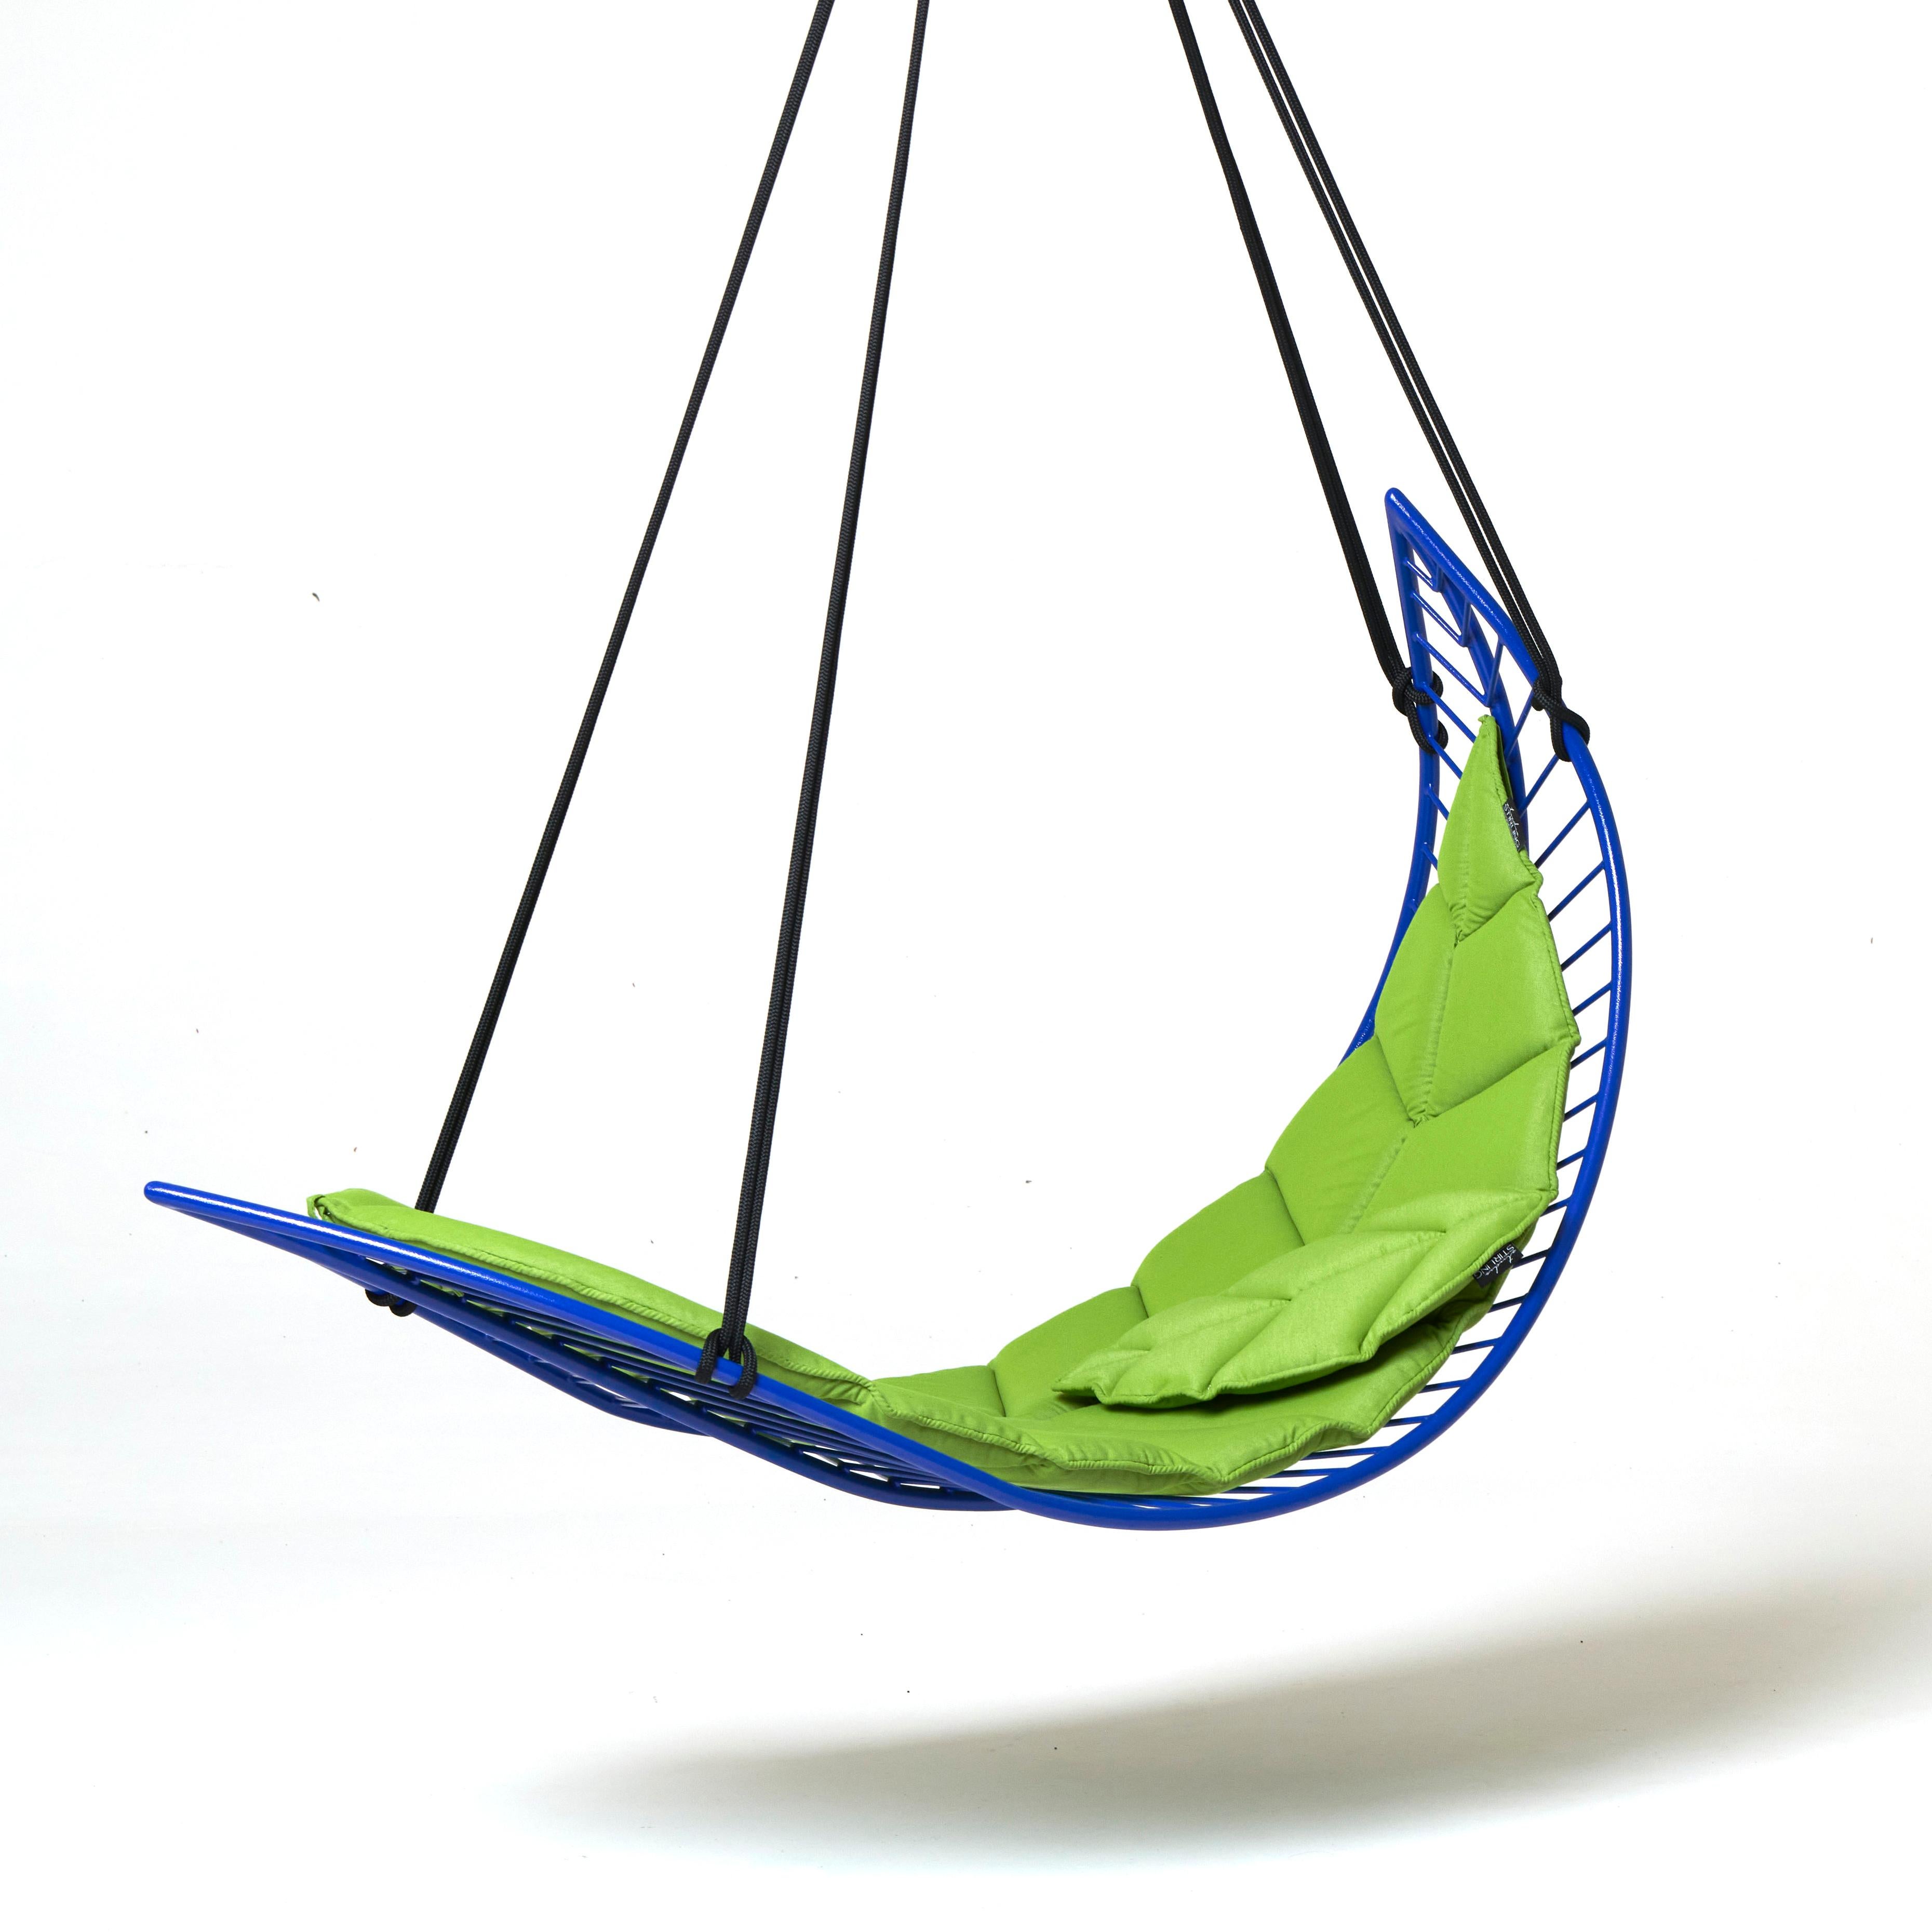 The Leaf hanging chair swing seat is fluid and organic. The chair is inspired by nature and is reminiscent of organic leaf shapes with its veins flowing out from the centre. It is simple and striking in its visual appeal.

The chair has been